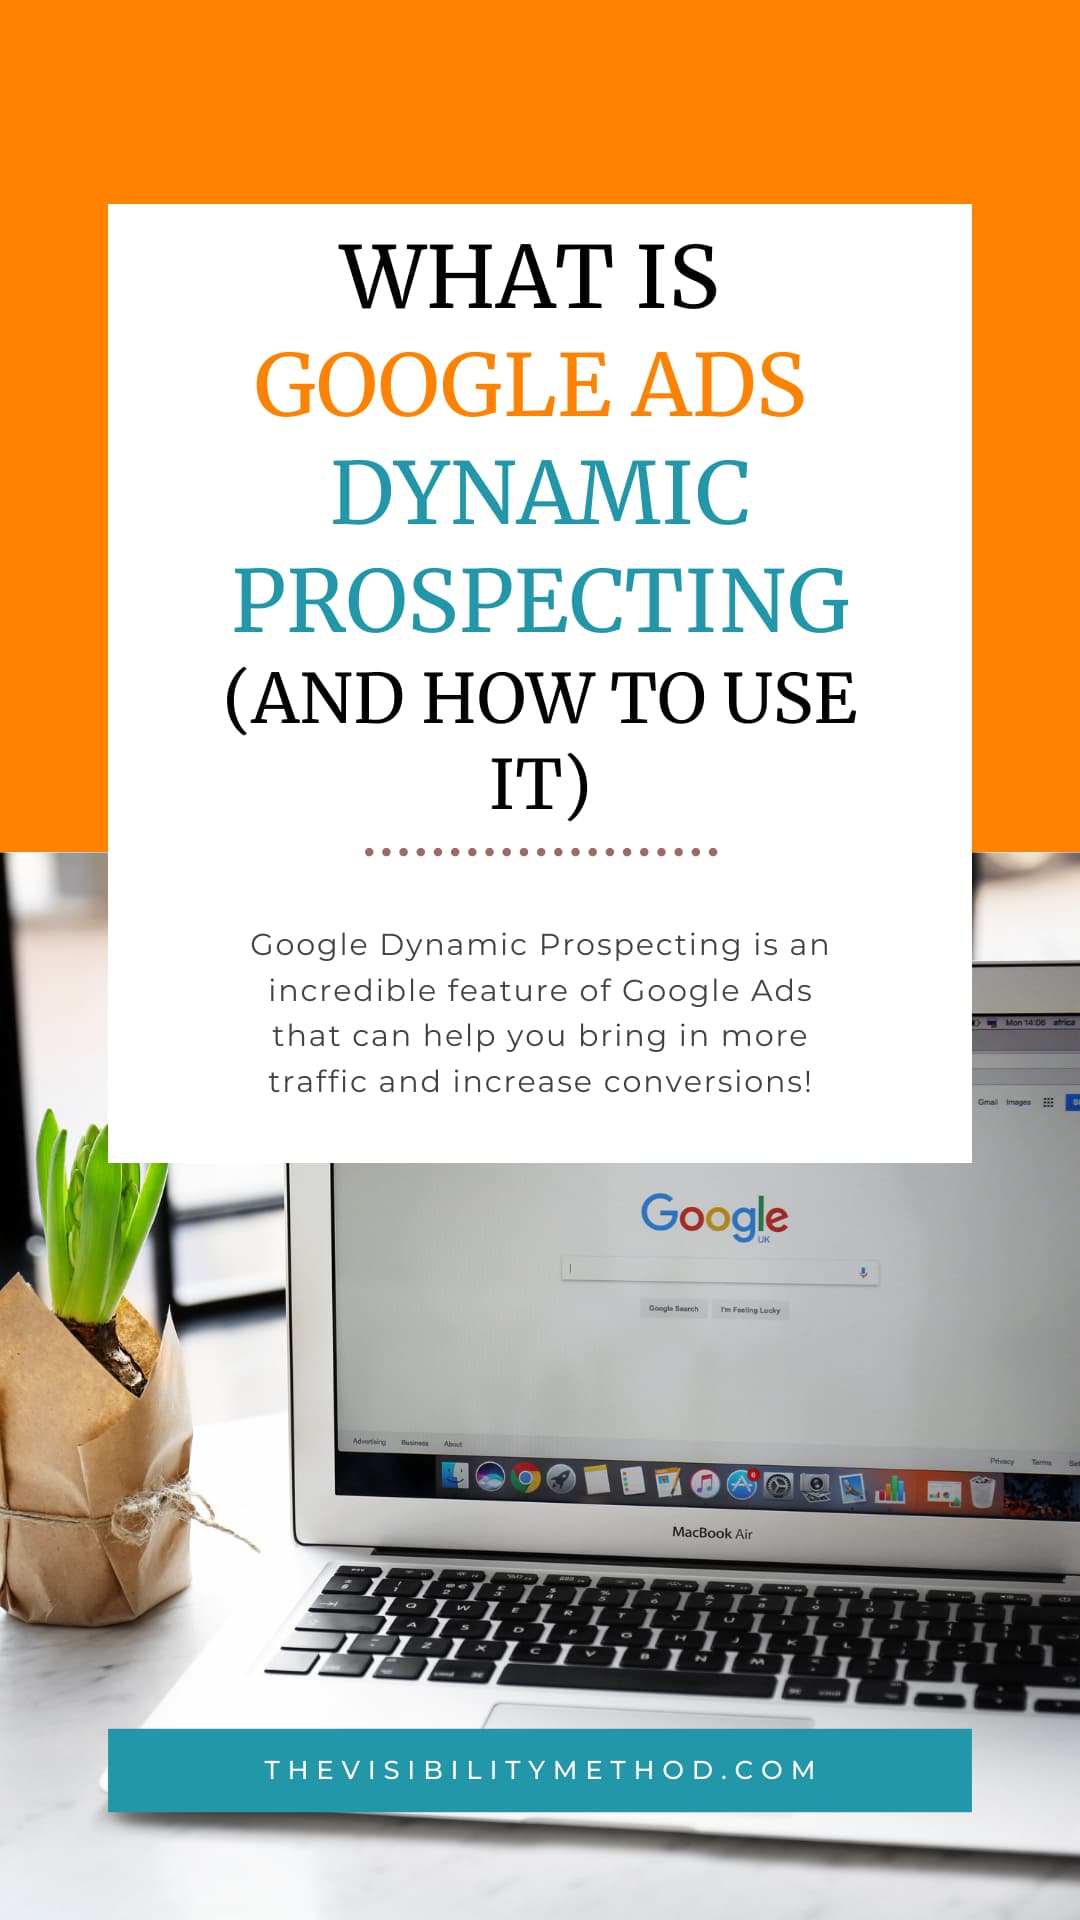 What is Google Ads Dynamic Prospecting (and How to Use It)?